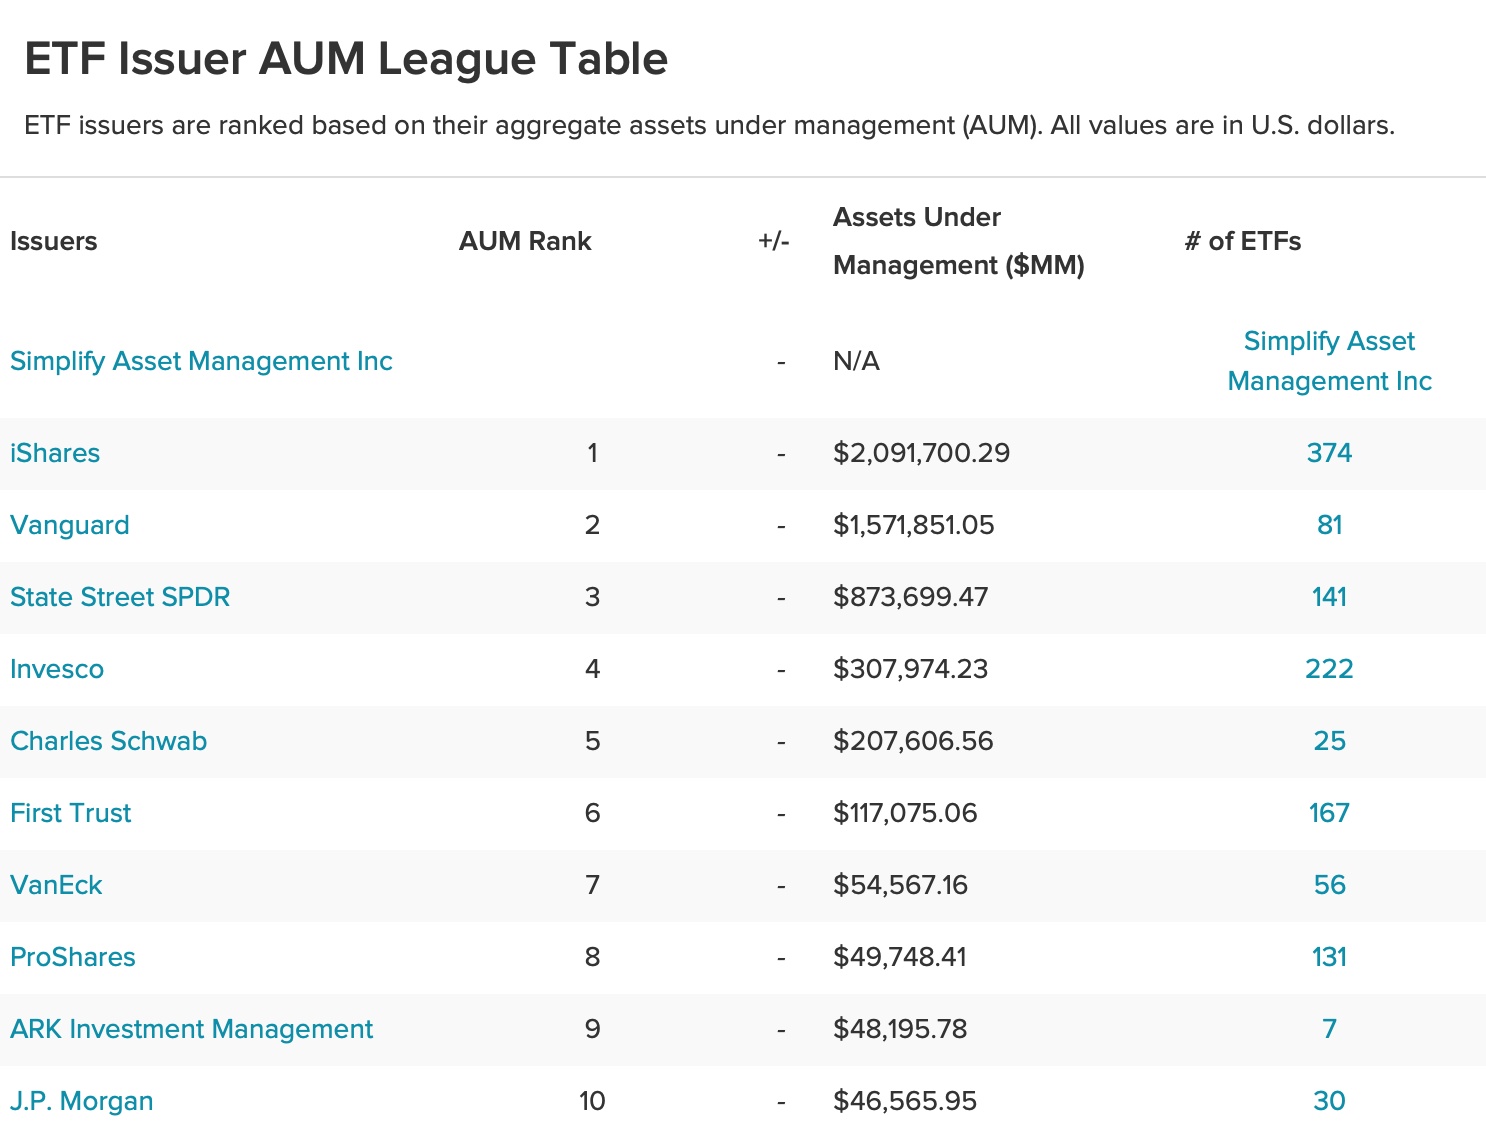 The ETF world is dominated by just a few firms, though ARK is currently fourth in flows over the past three months. Margins are low for most firms, so you need to scale. Source: [ETFdb](https://etfdb.com/etfs/issuers/#issuer-power-rankings__aum&sort_name=revenue_position&sort_order=asc&page=1).